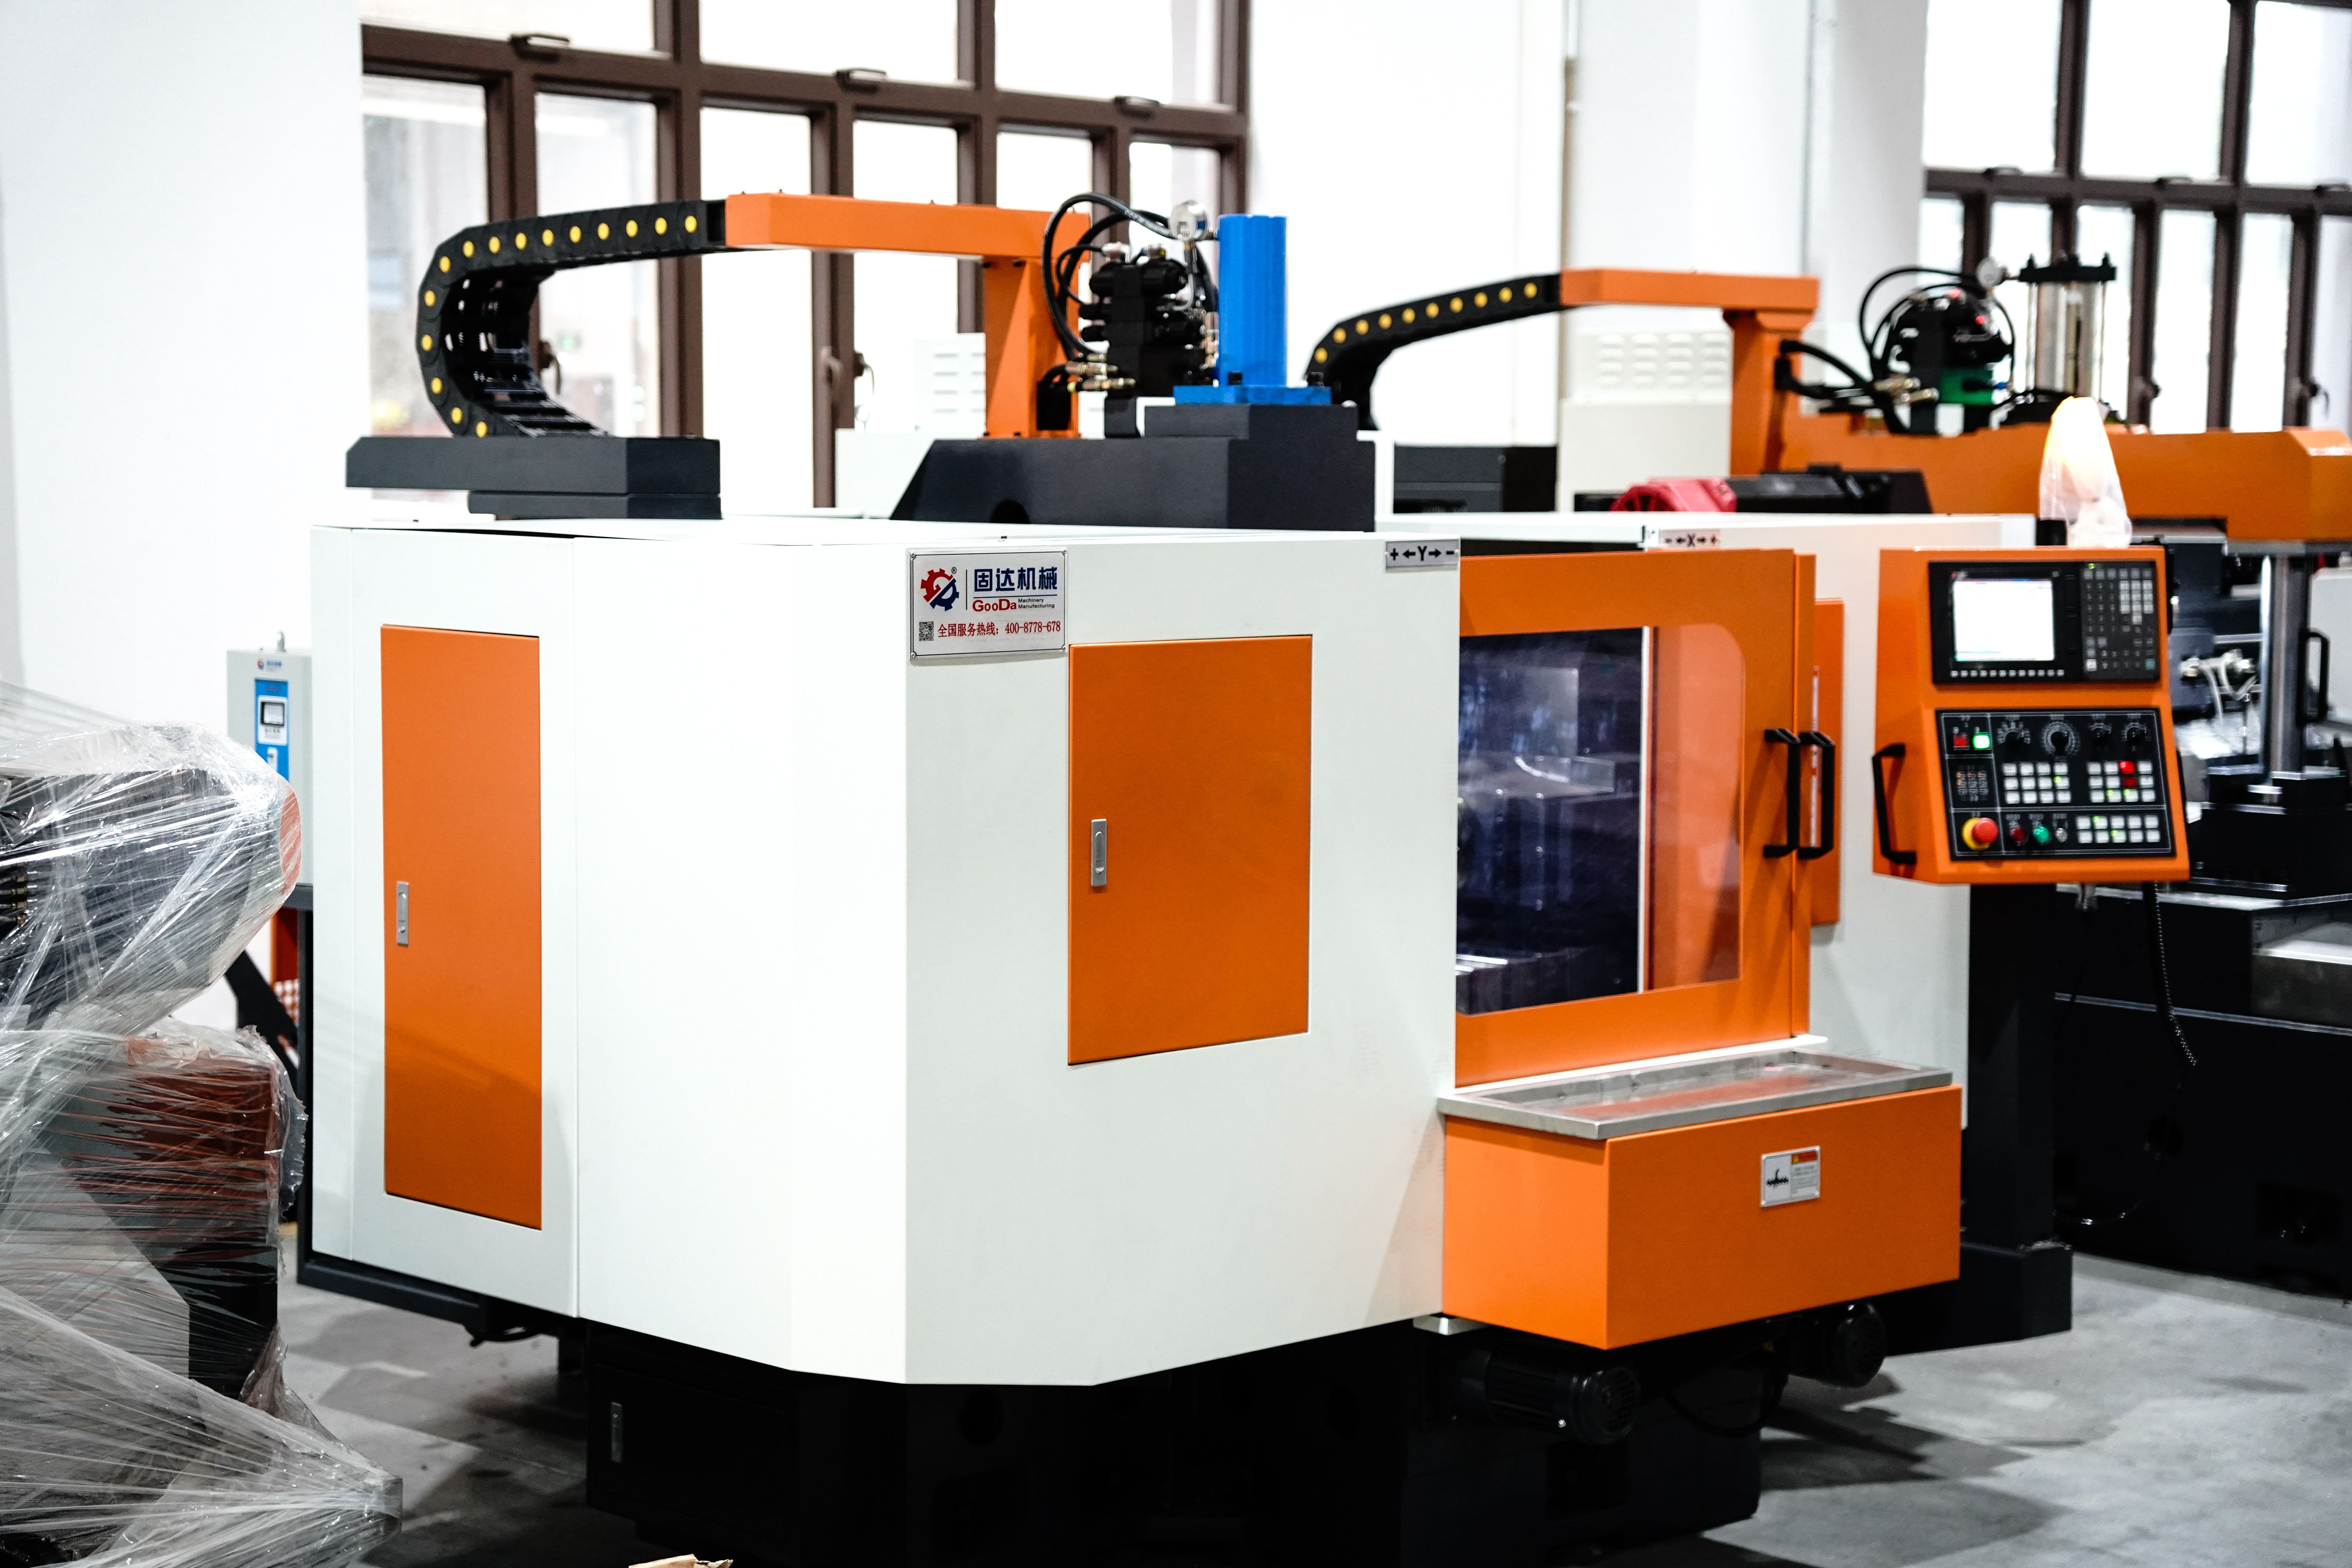 GooDa CNC Twin Headed Milling Machine Horizontal Milling Machine with Two Heads 8 Faces, 1 Setup